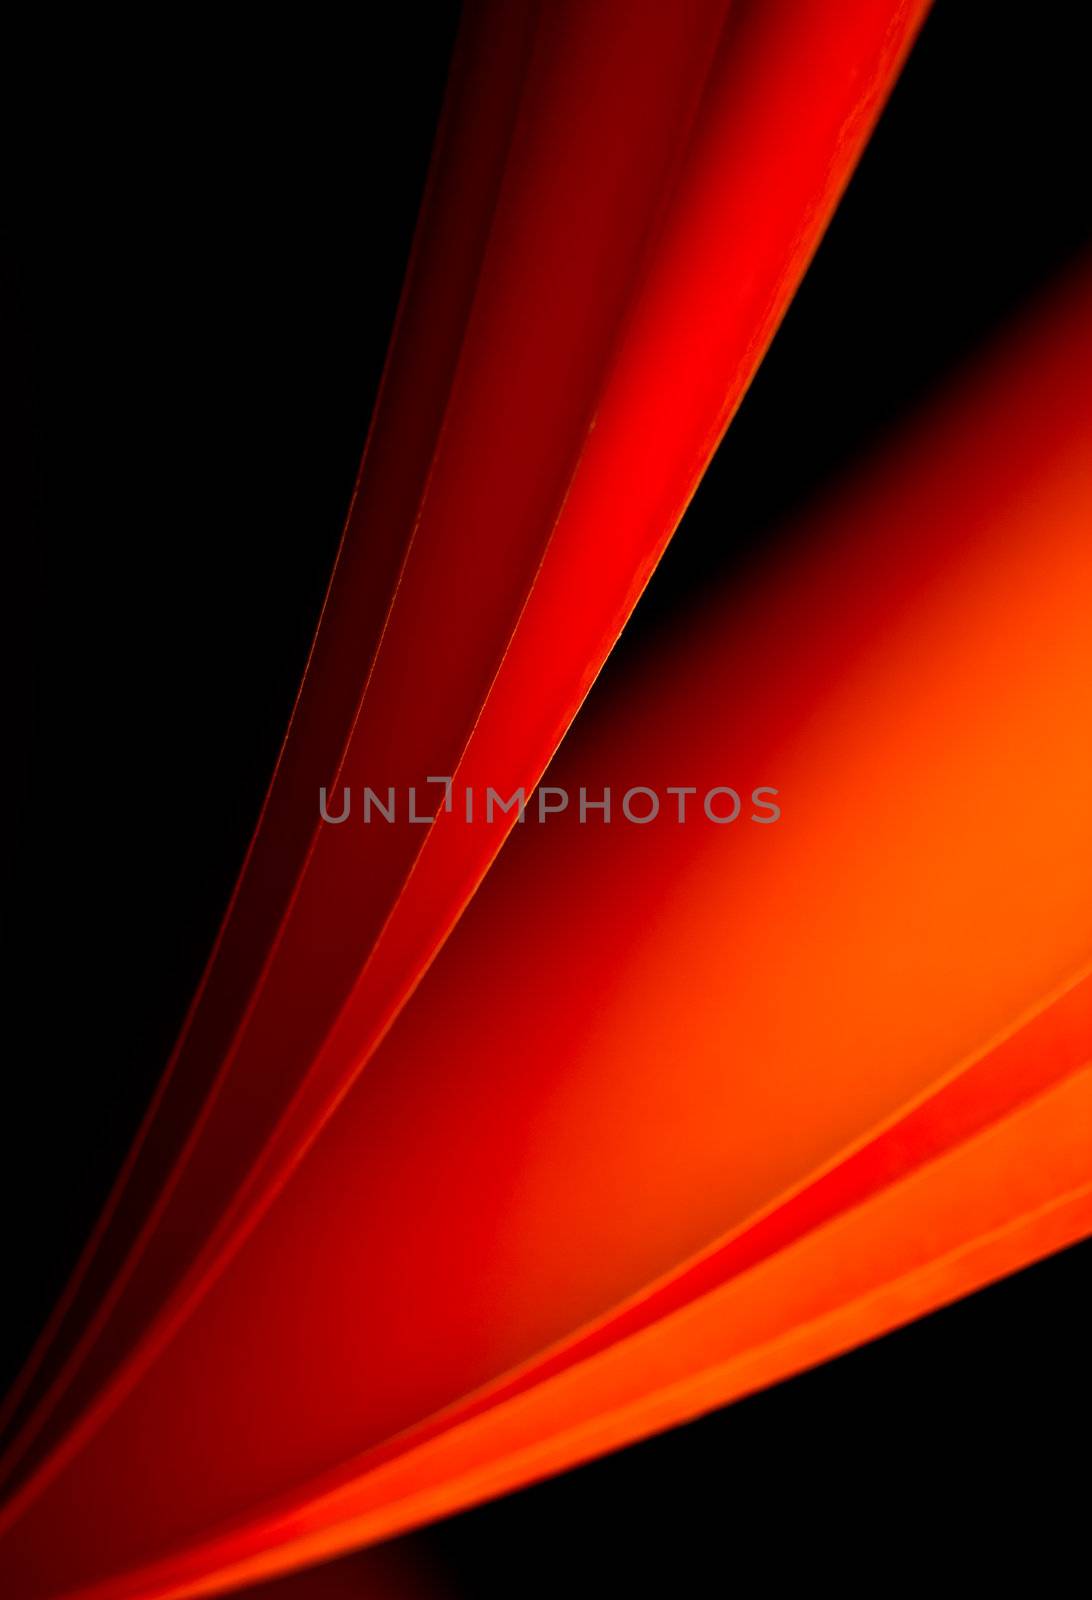 Red notepad paper illuminated by LED lights portrait orientation on black background